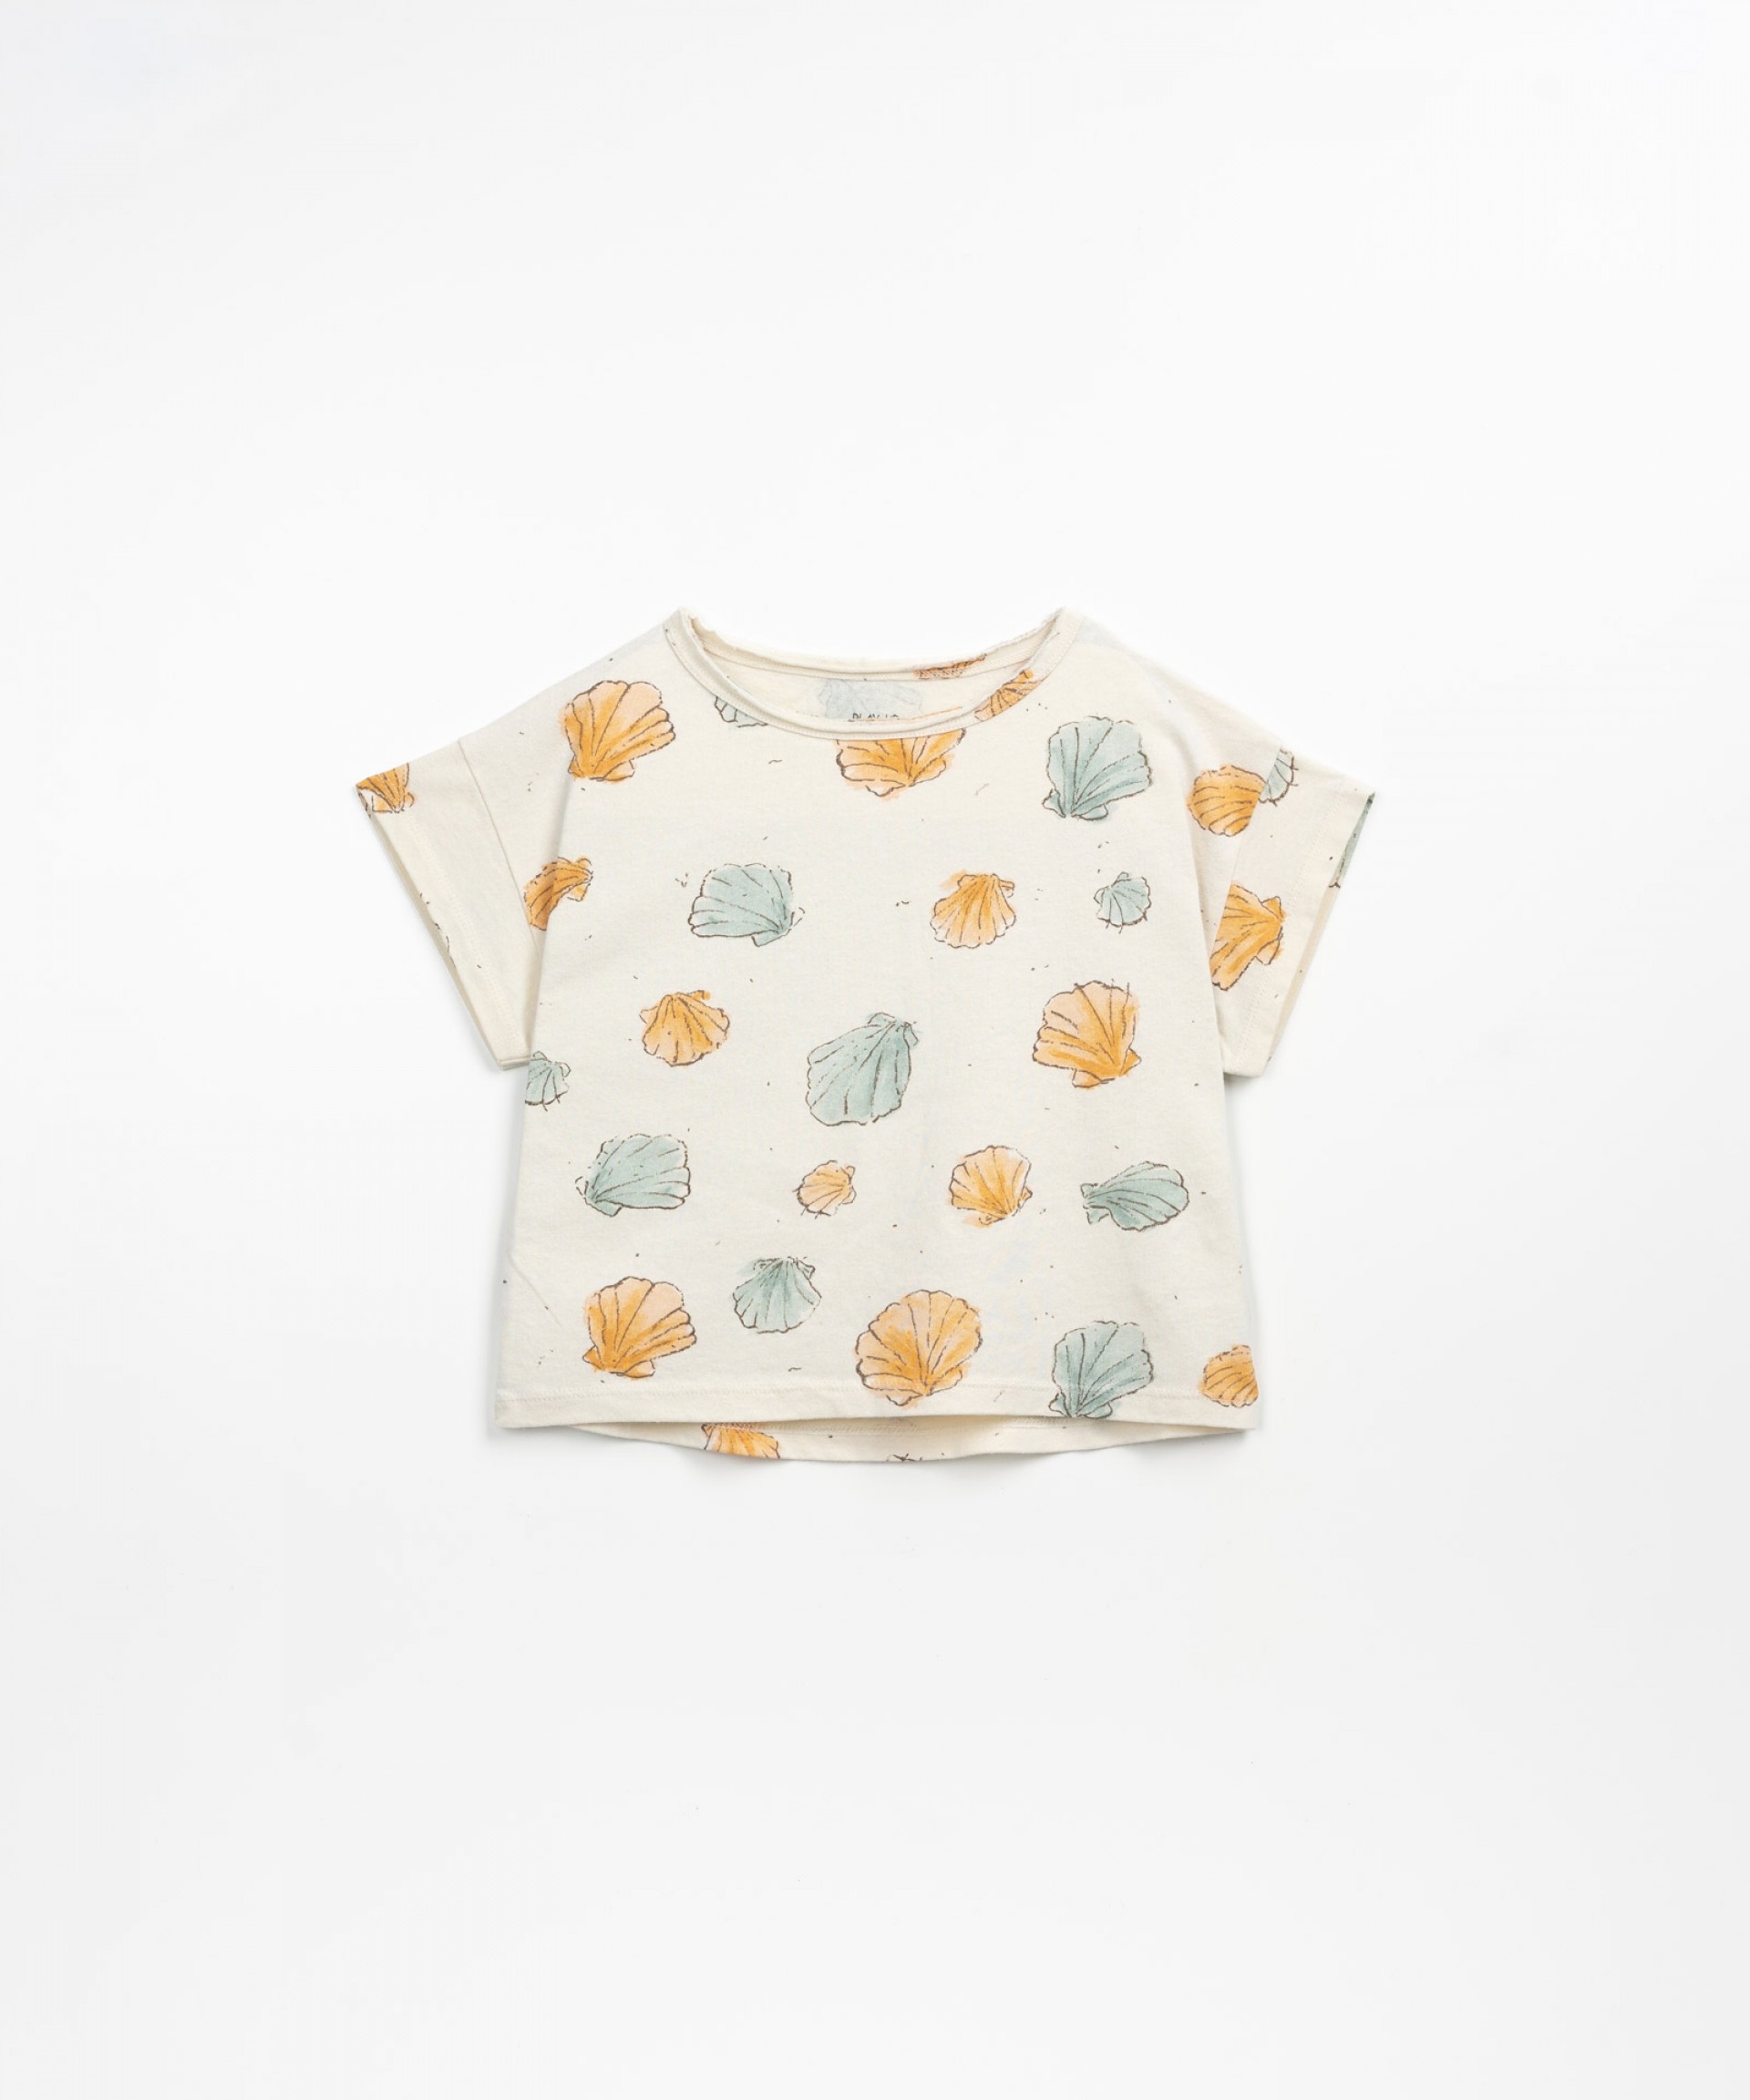 T-shirt in mixture of organic cotton and recycled cotton. | Textile Art